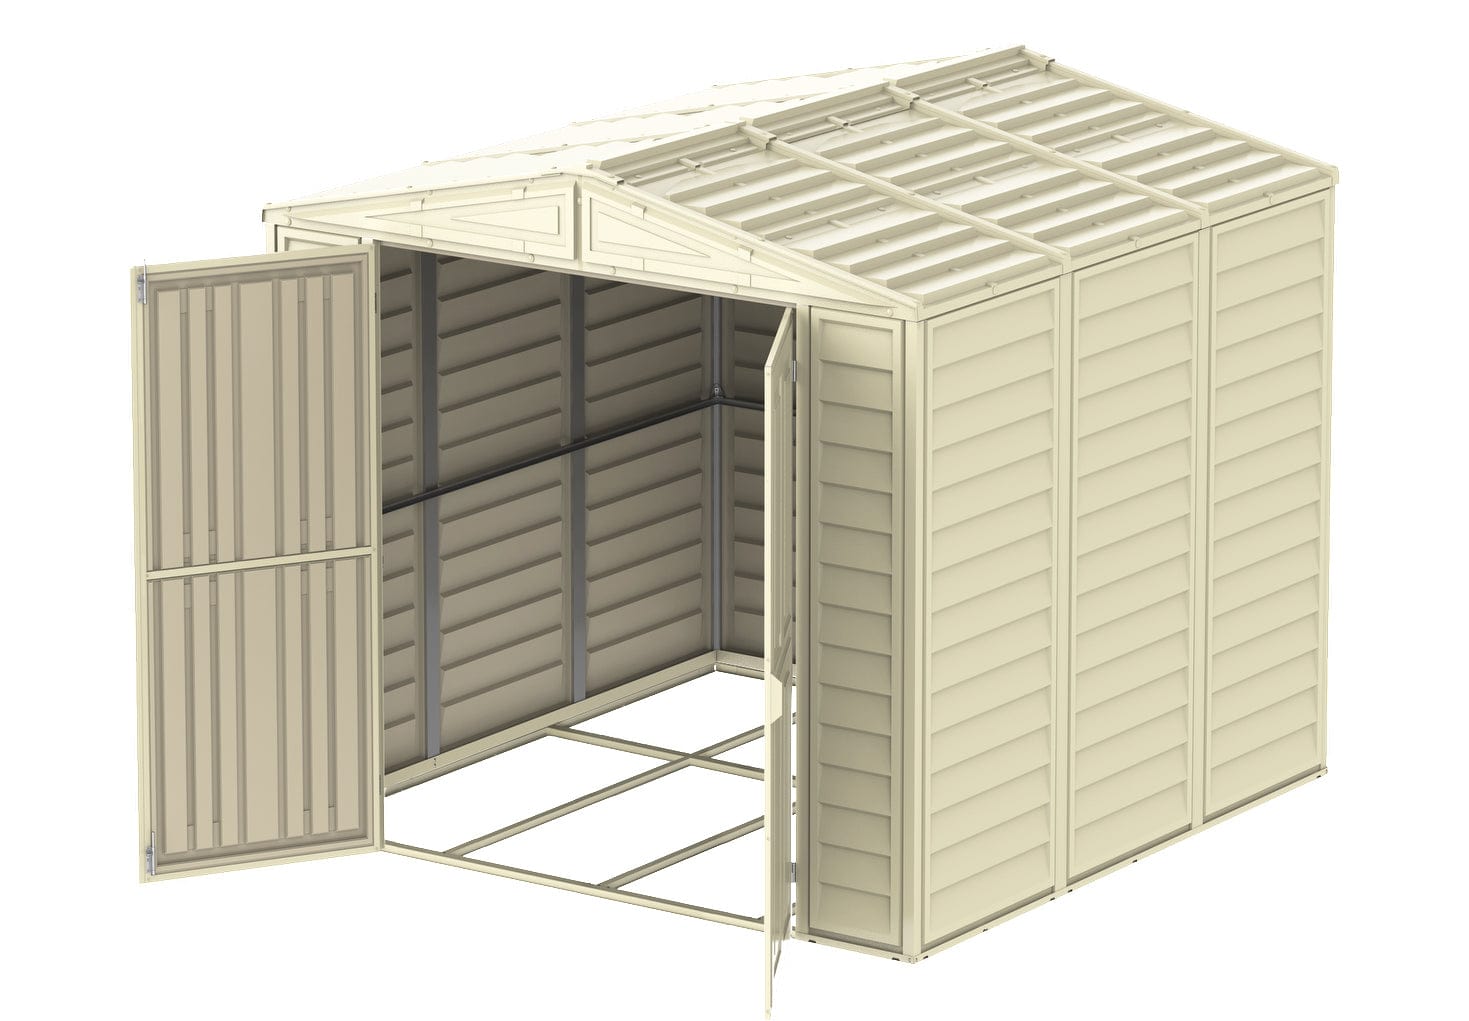 DuraMax Vinyl Shed 8x8 DuraMate with Foundation Kit